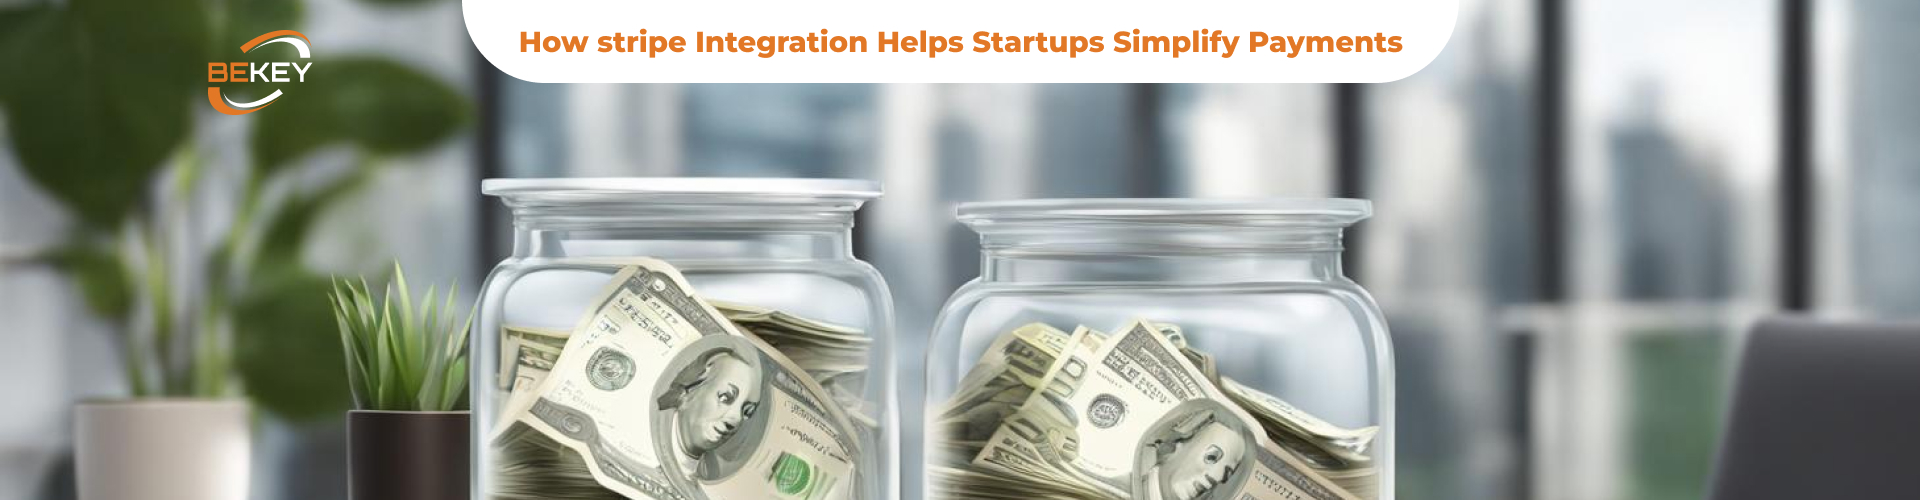 How Stripe Integration helps startups simplify payments